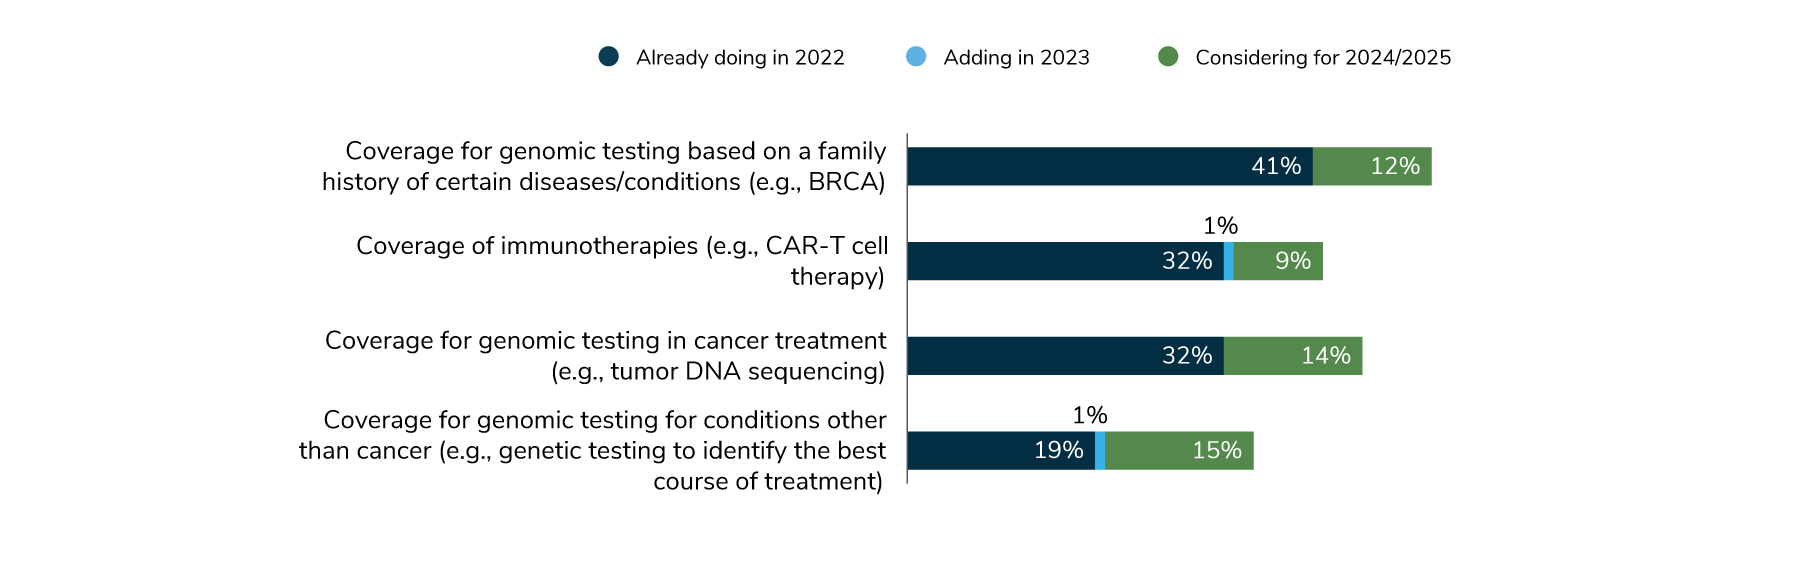 In 2023, employers will cover: genomic testing based on family history (41%), immunotherapies (33%), genomic testing in cancer treatment (32%) and genomic testing for other conditions other than cancer (20%).